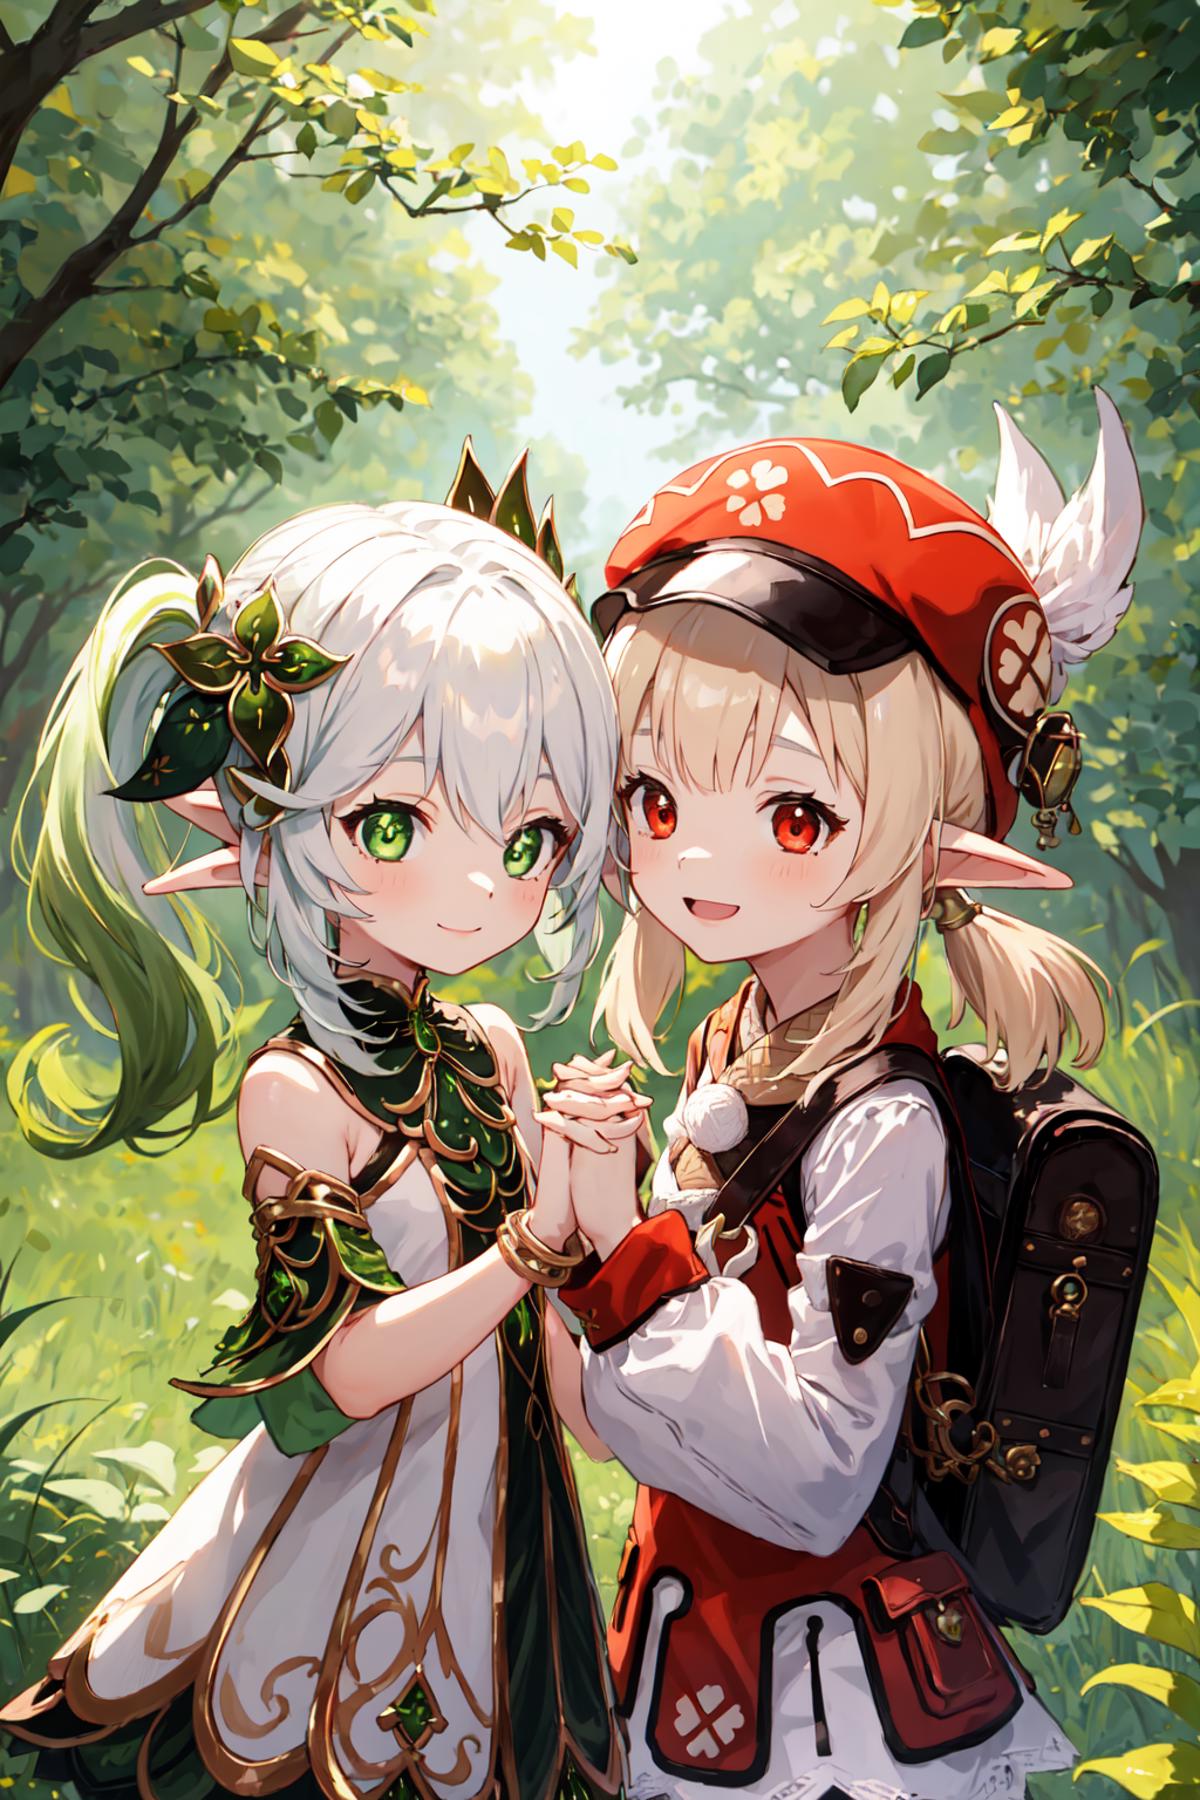 Two Elf-like Characters with Green Eyes and Green Hair, Holding Hands and Smiling.